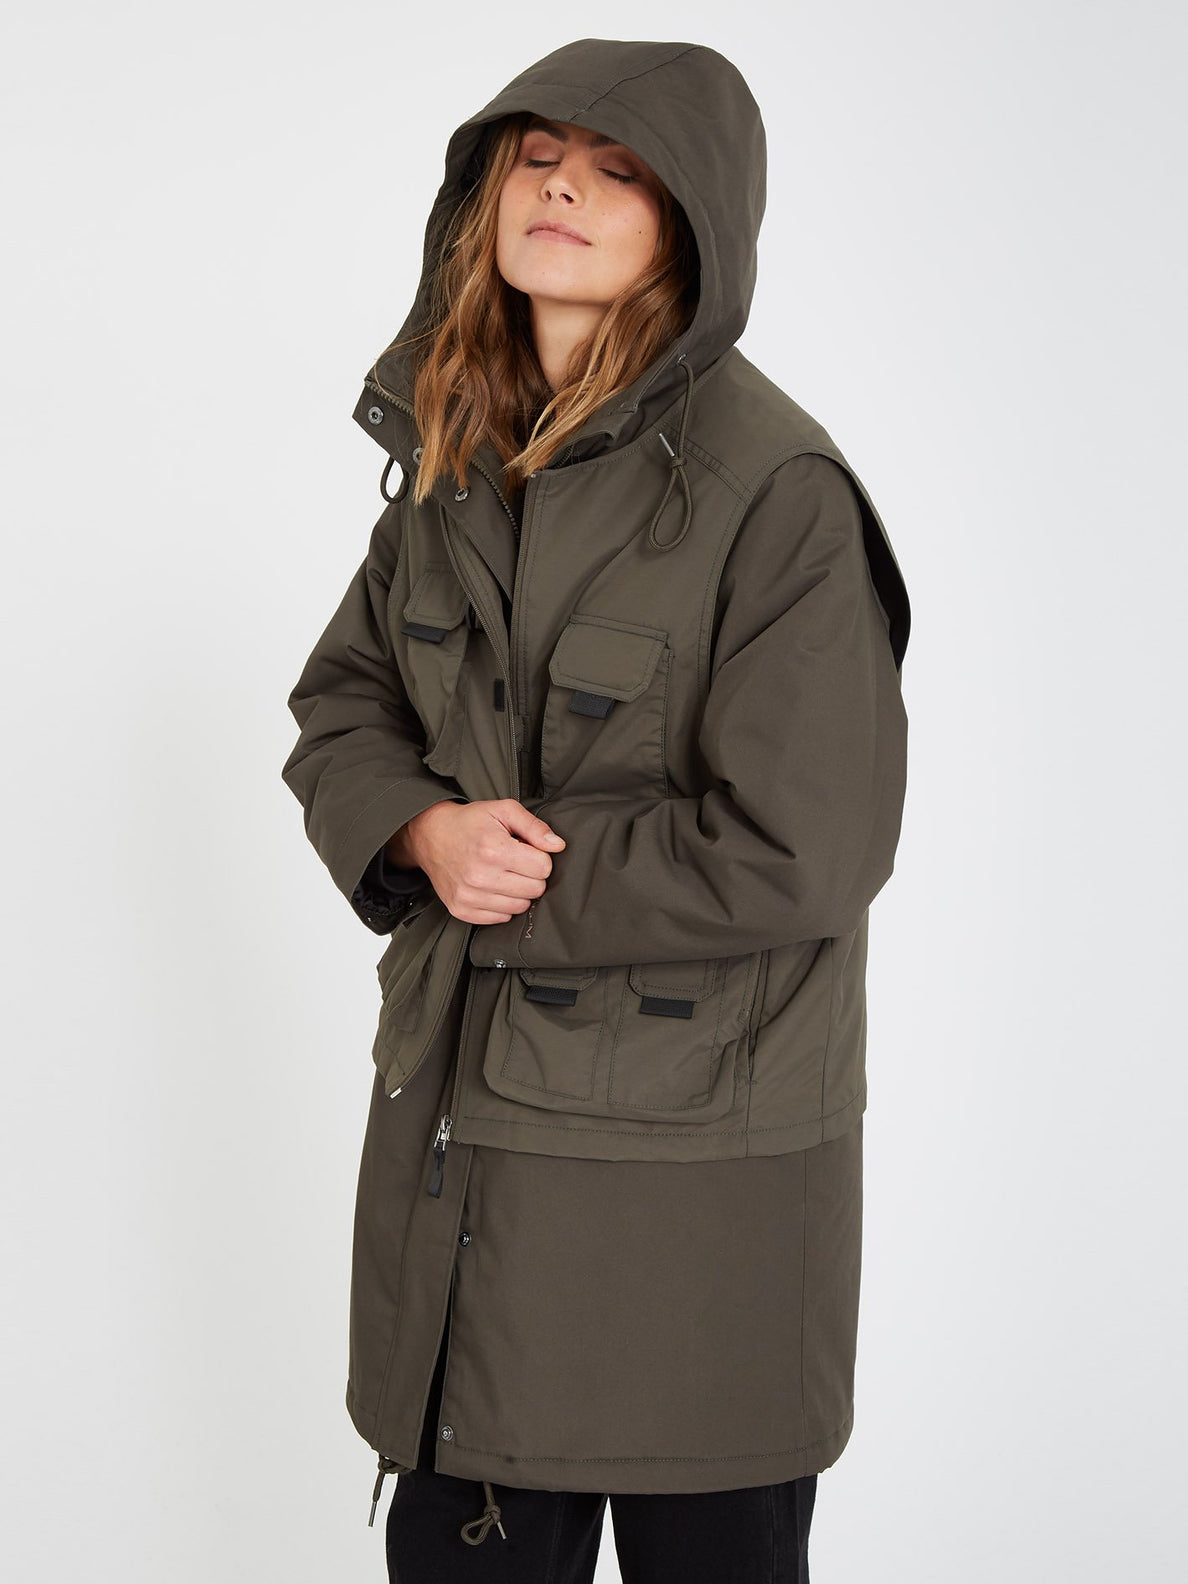 Cimandy 5K 3In1 Parka - ARMY GREEN COMBO (B1732105_ARC) [6]